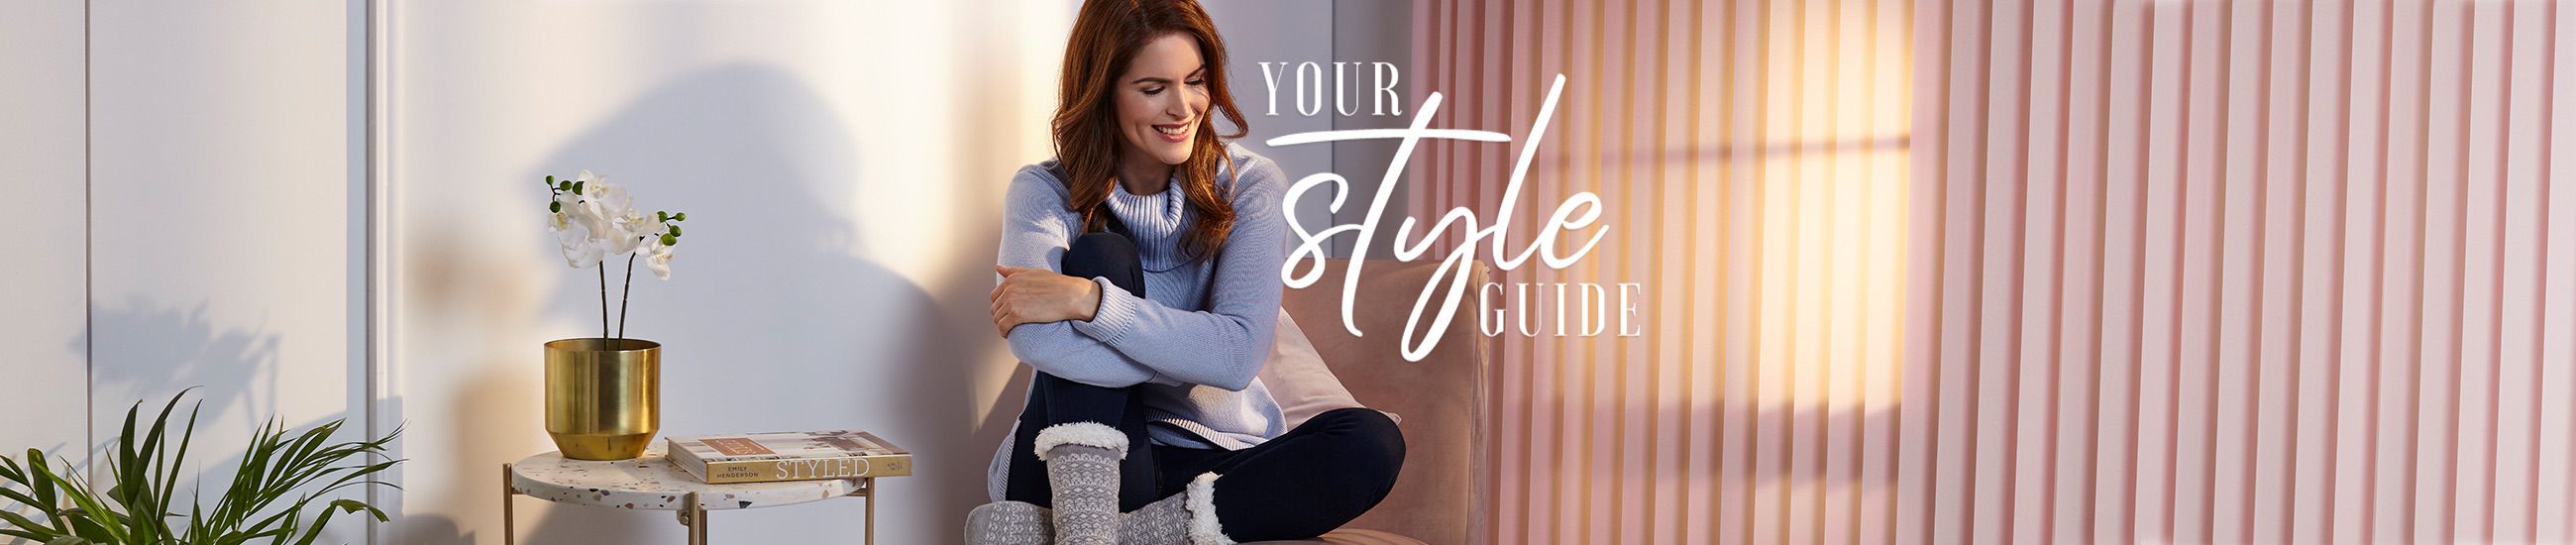 Your Style Guide - The Warm Up